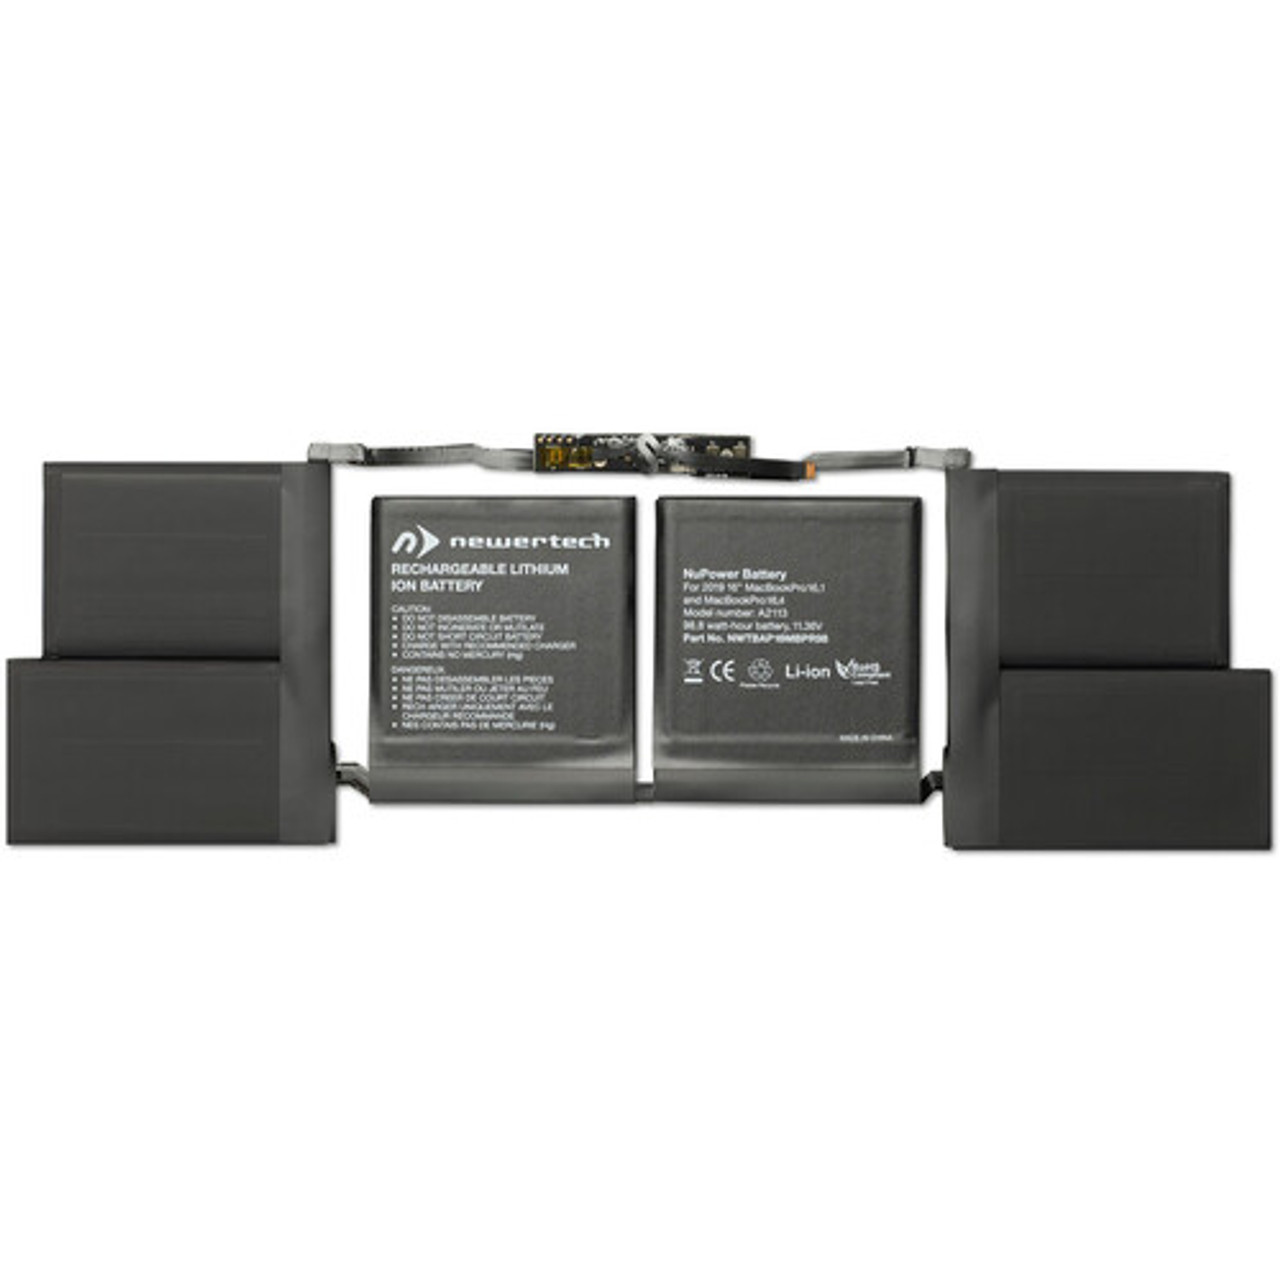 Newer Tech 98.8W NewerTech NuPower Battery Replacement Solution for 16-inch MacBook Pro with Retina Display (2019) - NWTBAP16MBPR98K